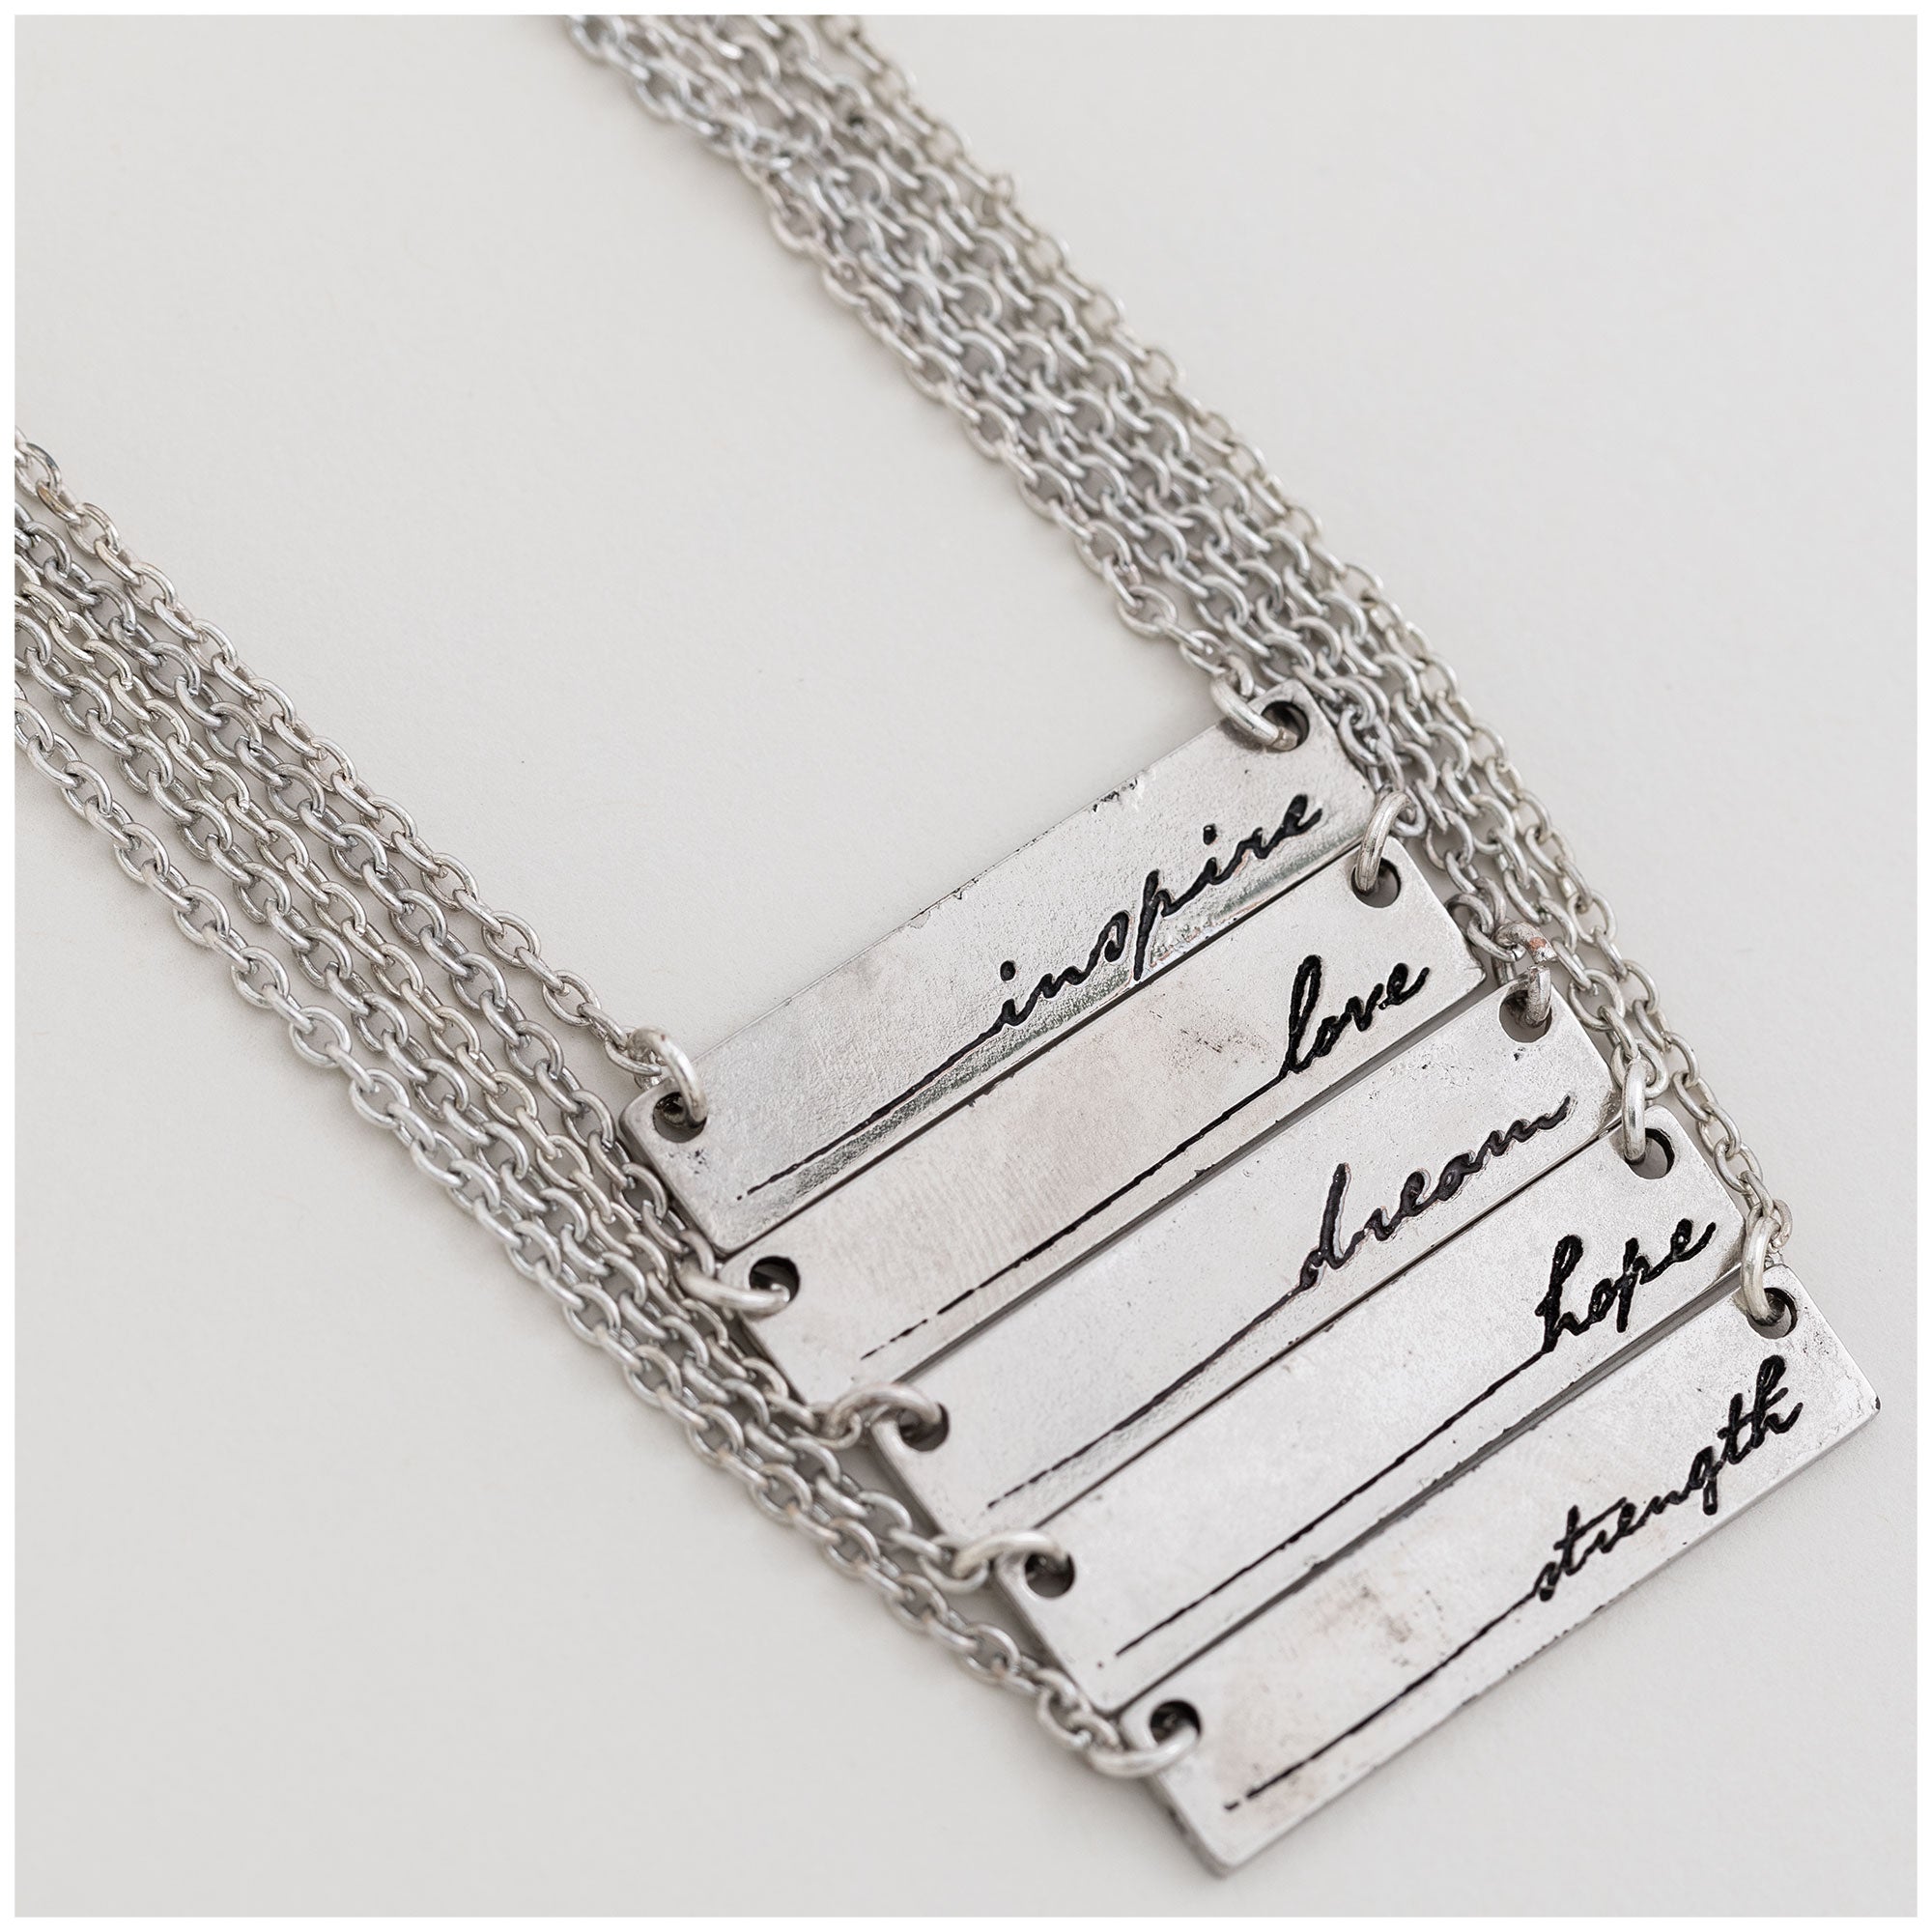 Life's Gifts Necklace - Inspire